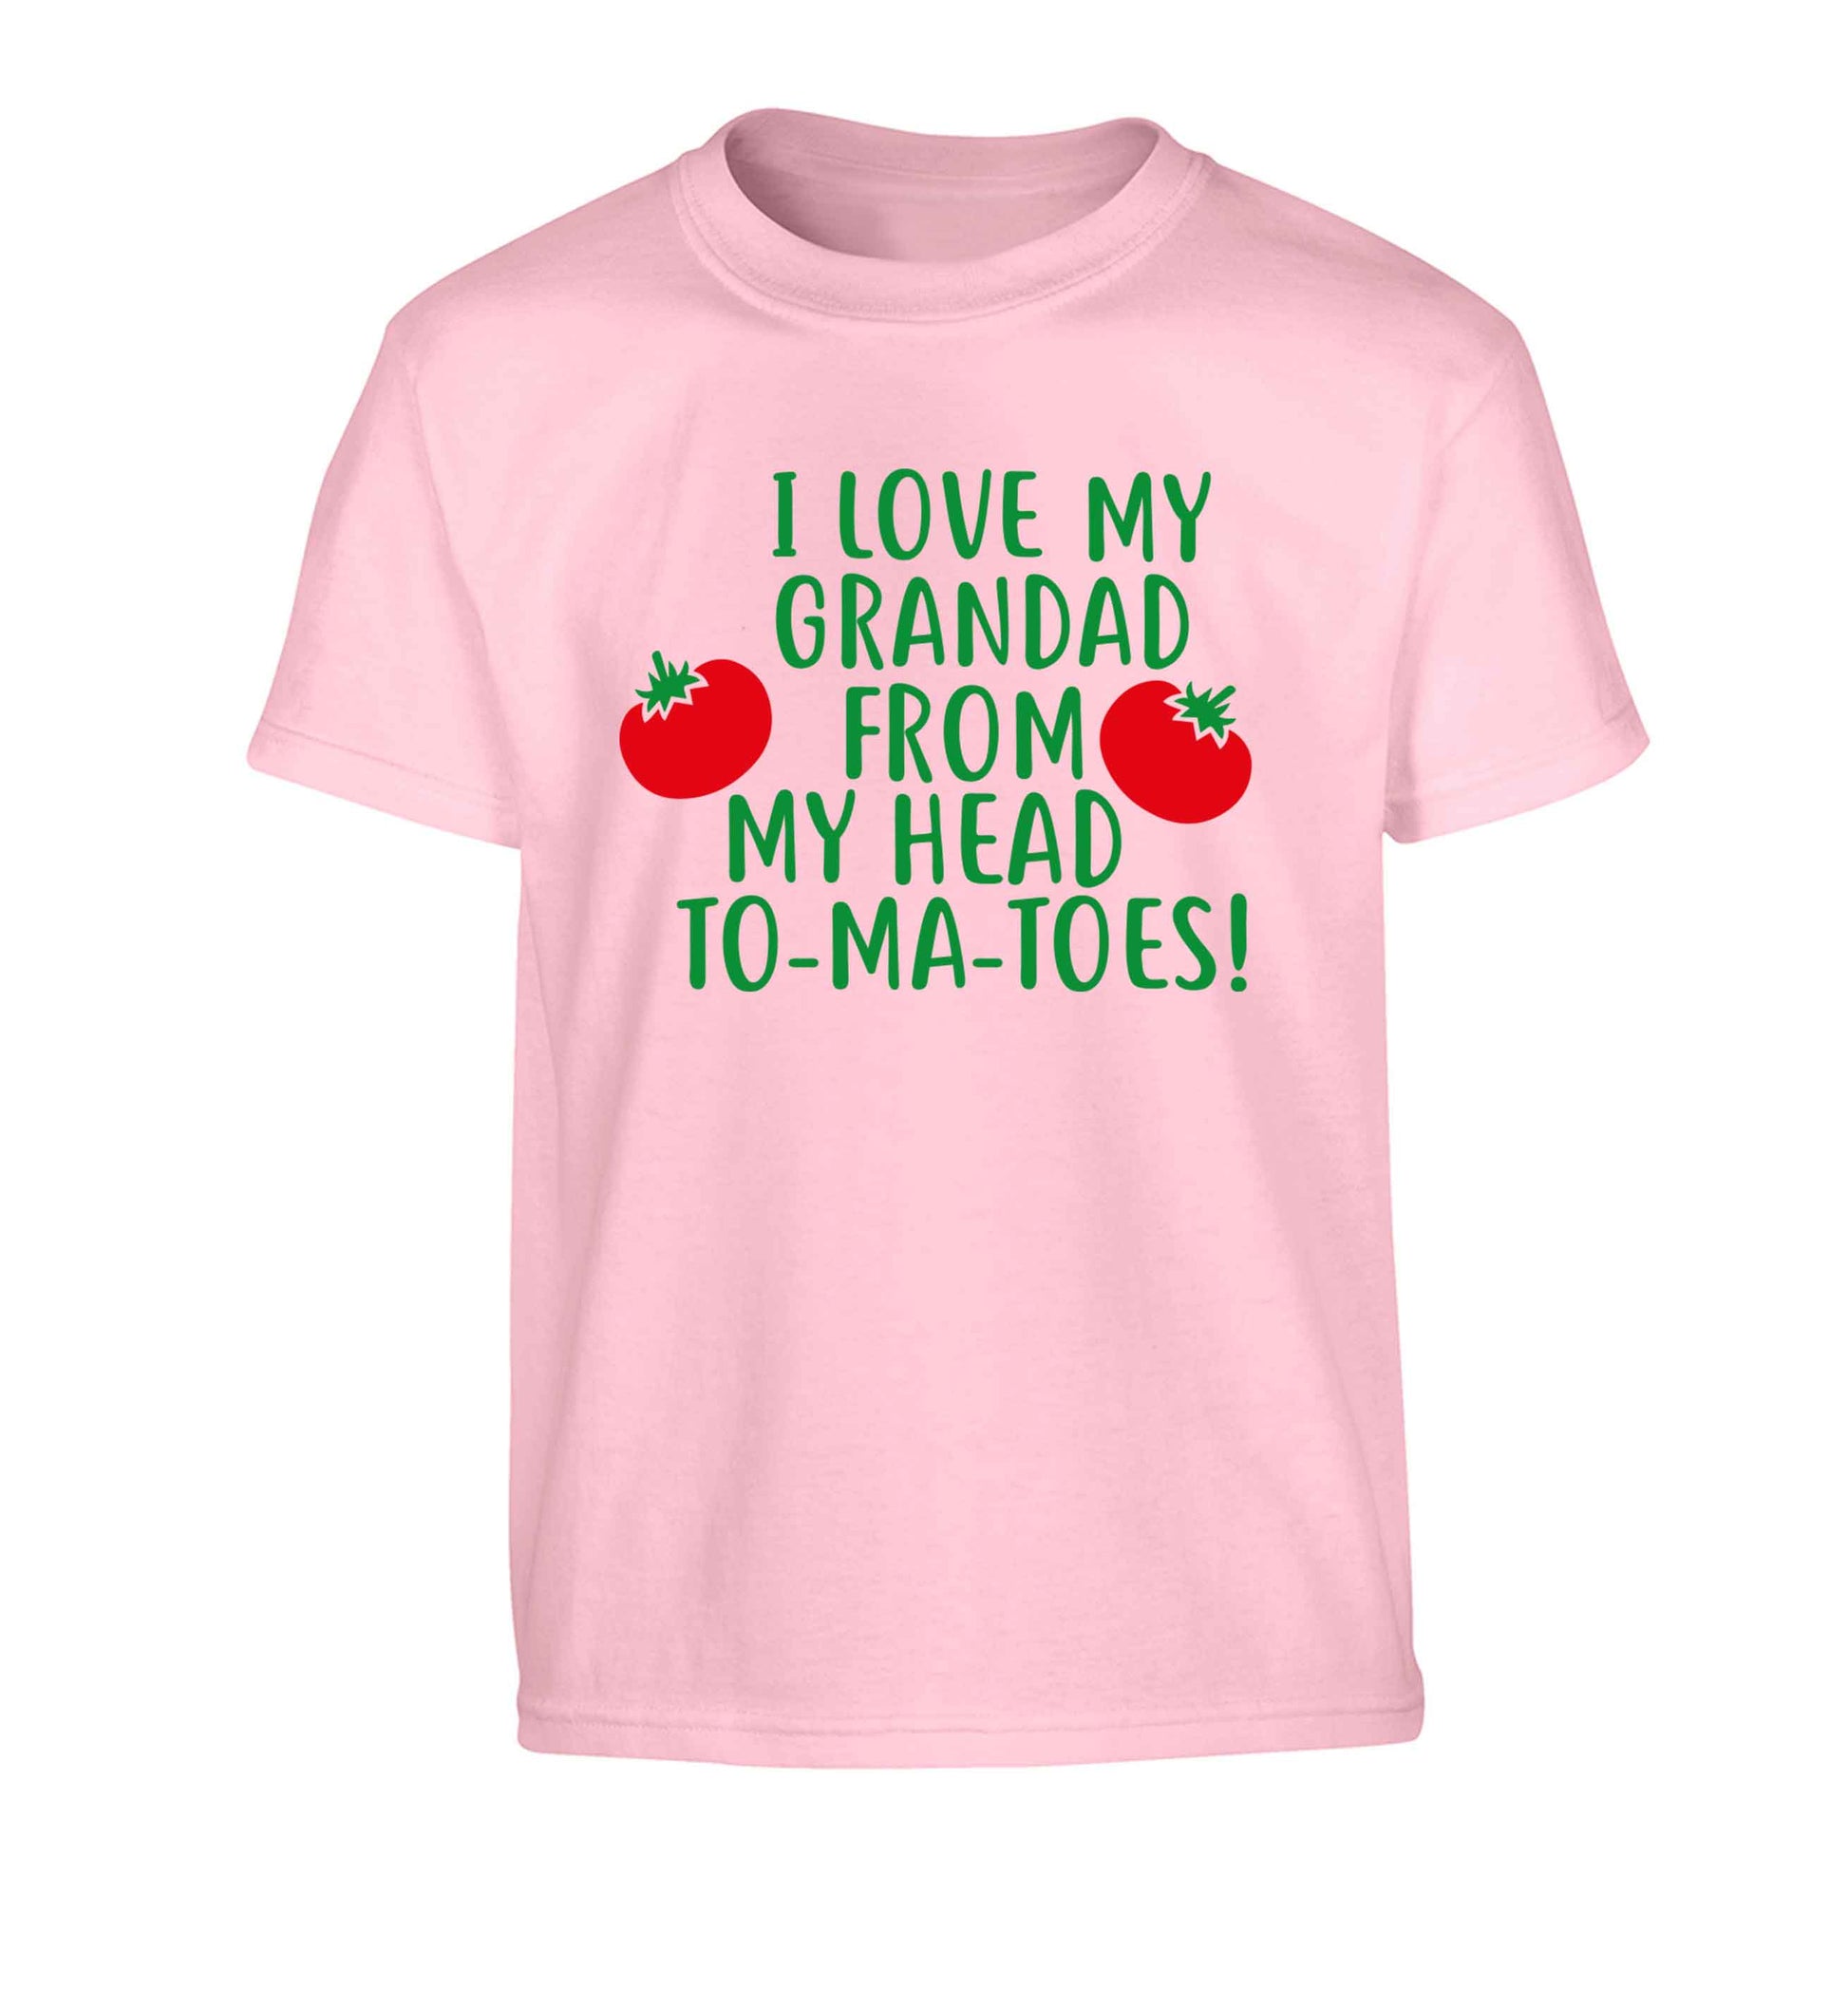 I love my grandad from my head To-Ma-Toes Children's light pink Tshirt 12-13 Years